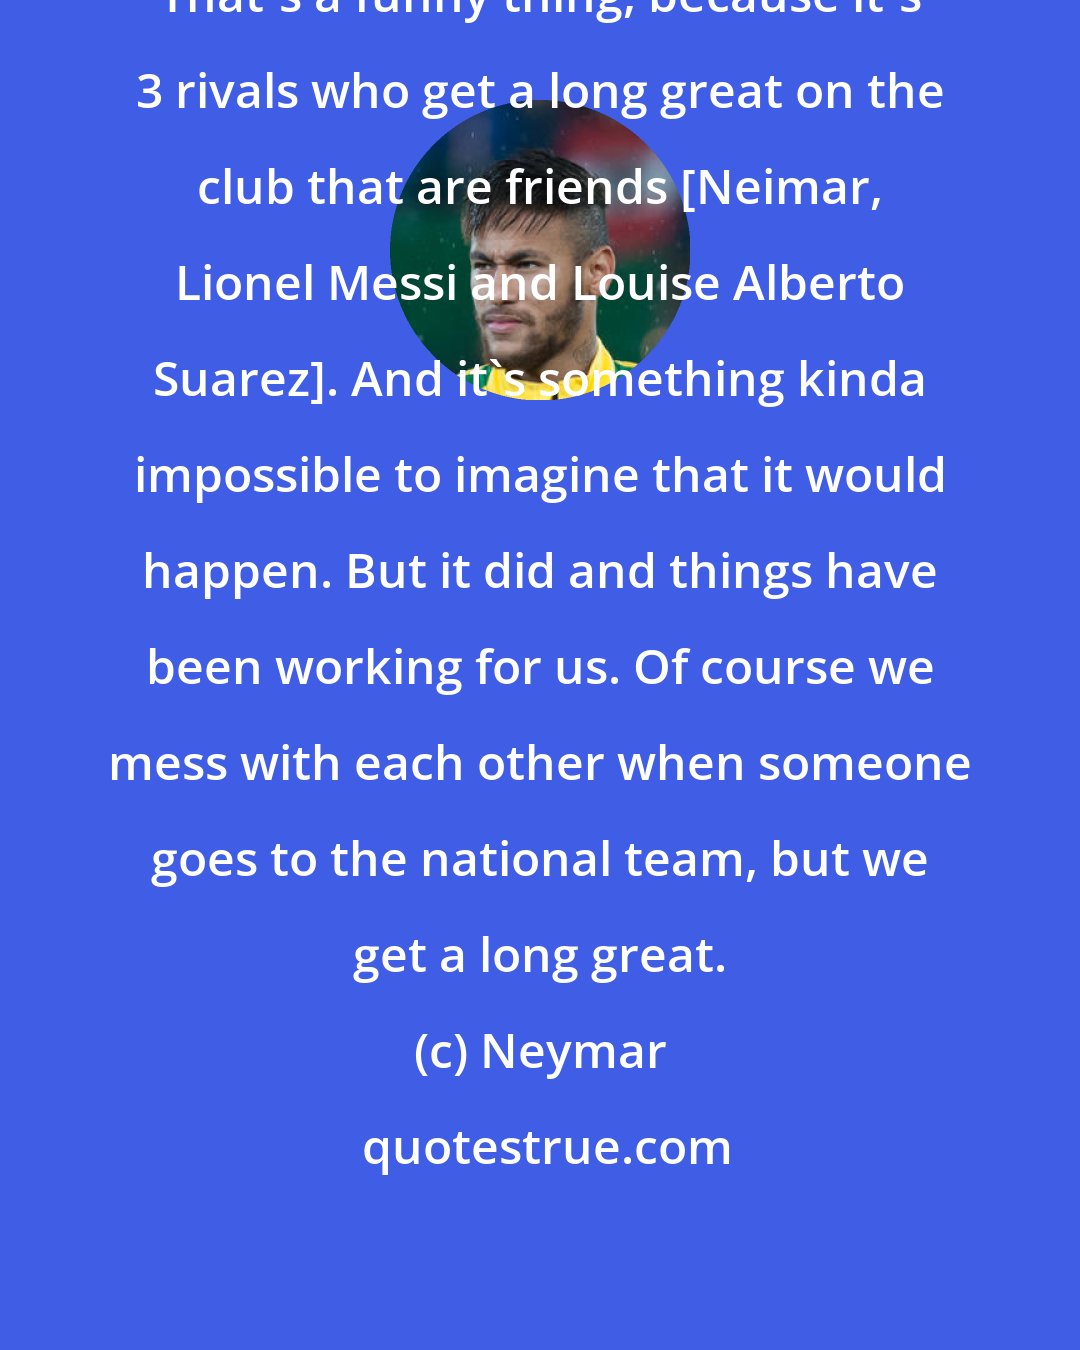 Neymar: That's a funny thing, because it's 3 rivals who get a long great on the club that are friends [Neimar, Lionel Messi and Louise Alberto Suarez]. And it's something kinda impossible to imagine that it would happen. But it did and things have been working for us. Of course we mess with each other when someone goes to the national team, but we get a long great.